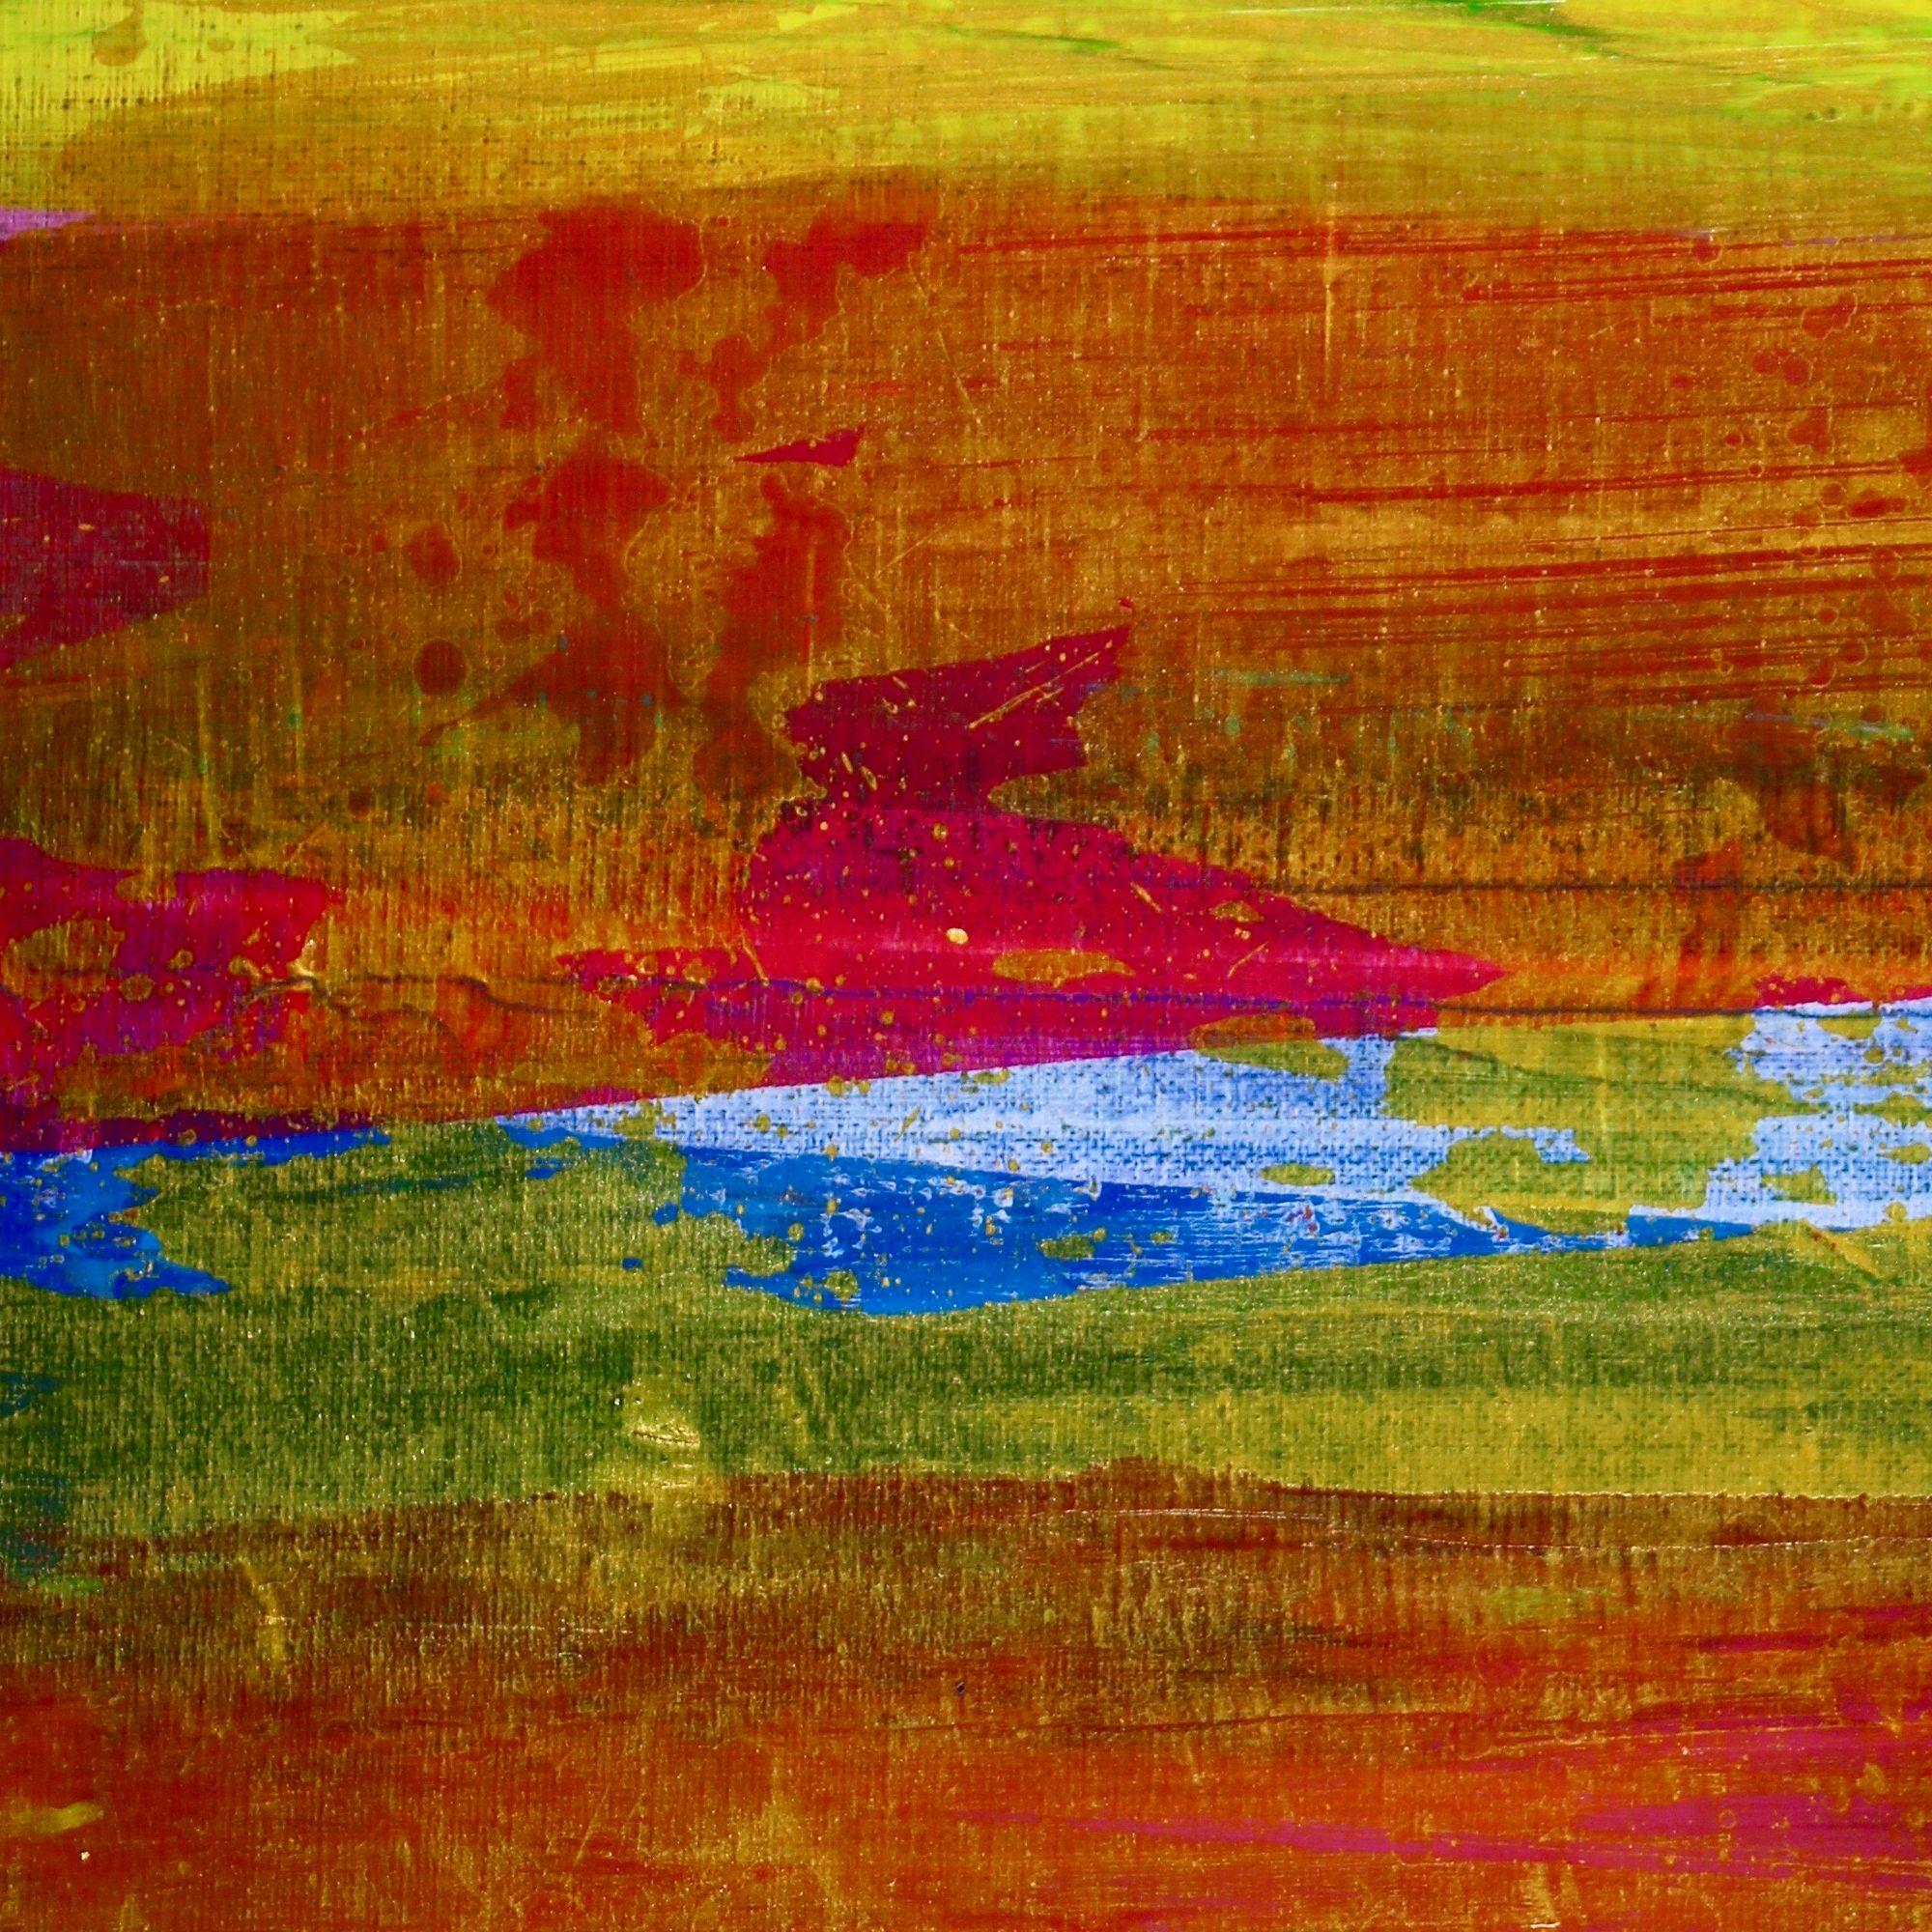 Very vibrant and bold colorfield painting with great light and organic details. Textured with many layers of gesso to prime the canvas then applied high quality Sennelier and Goldern Acrylics and glossy finish. This artwork is very reflective with